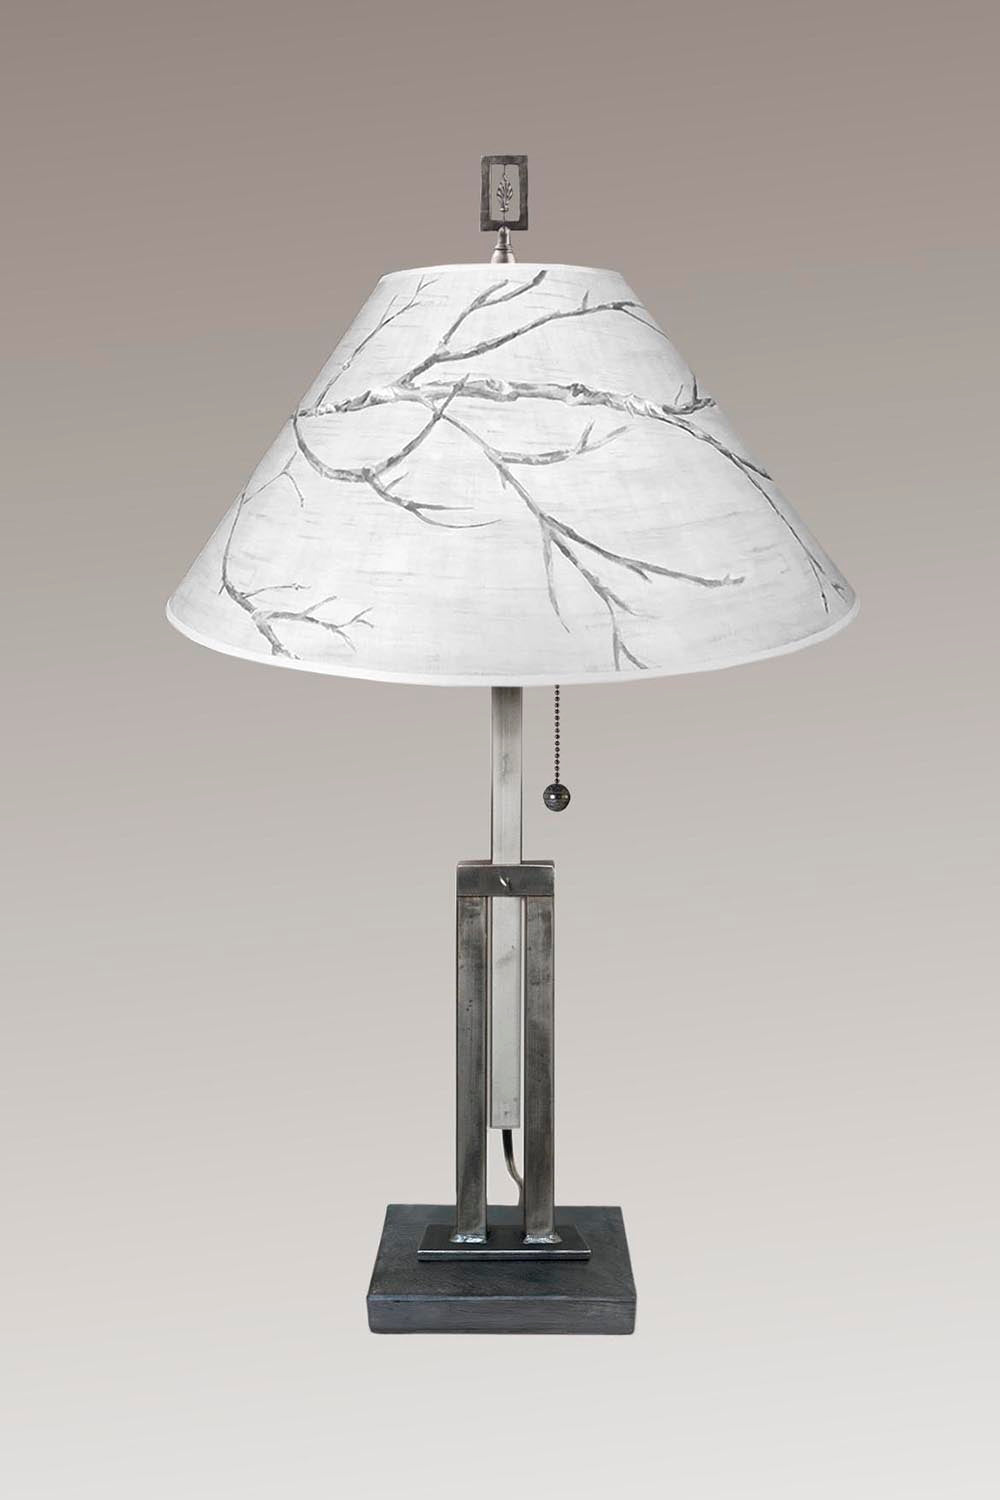 Janna Ugone & Co Table Lamps Adjustable-Height Steel Table Lamp with Large Conical Shade in Sweeping Branch